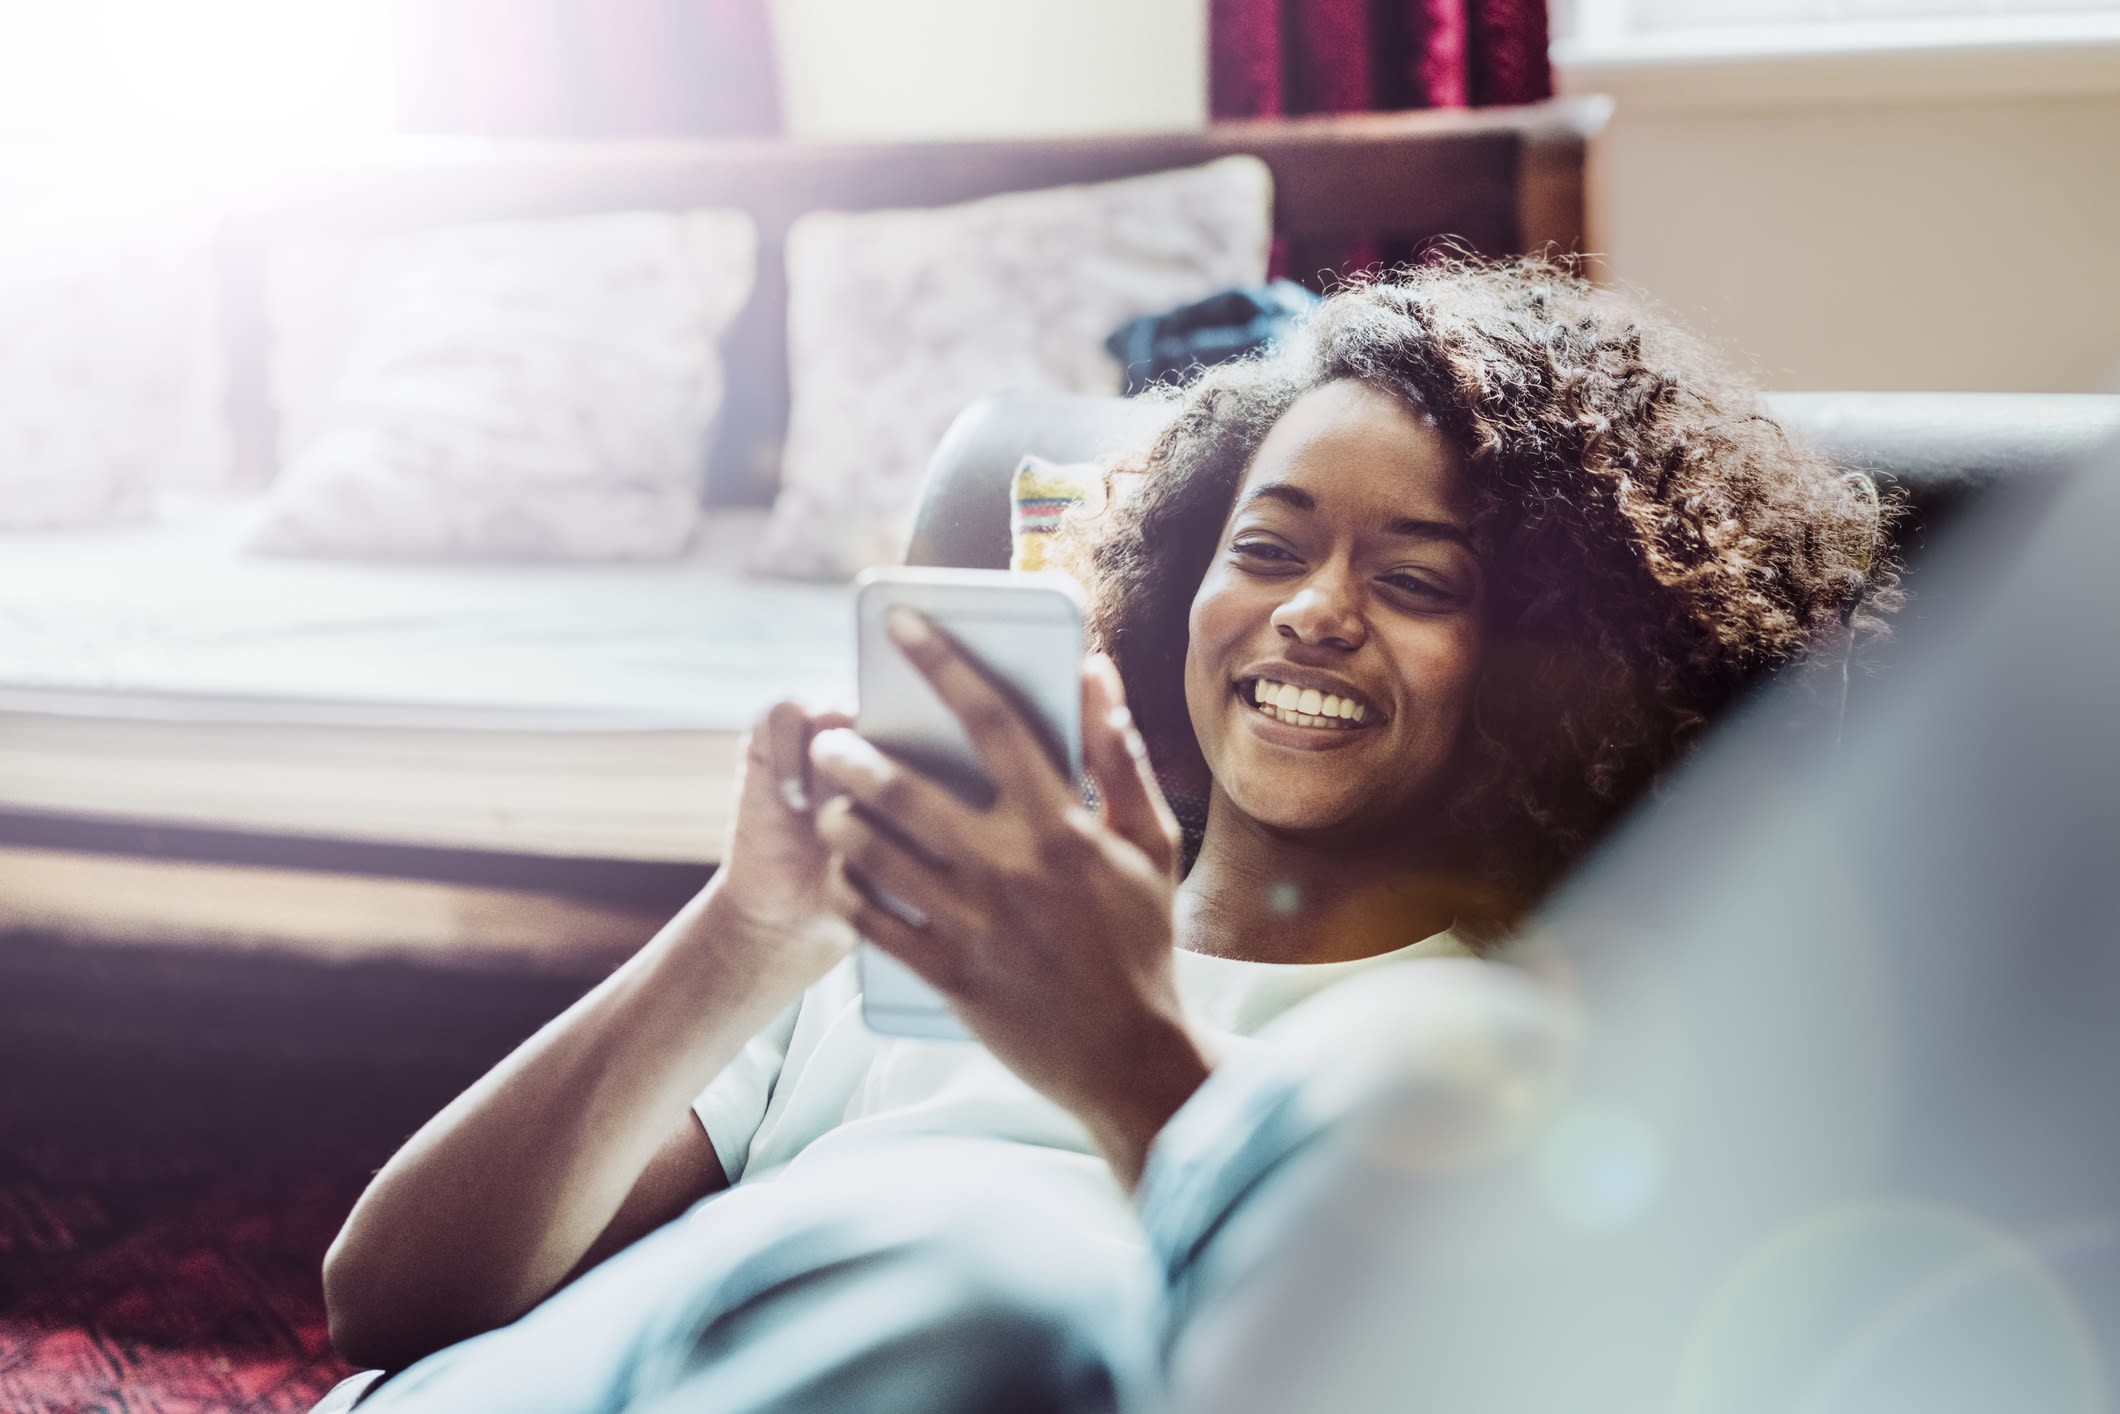 A smiling woman looking at her phone while lying on a sofa